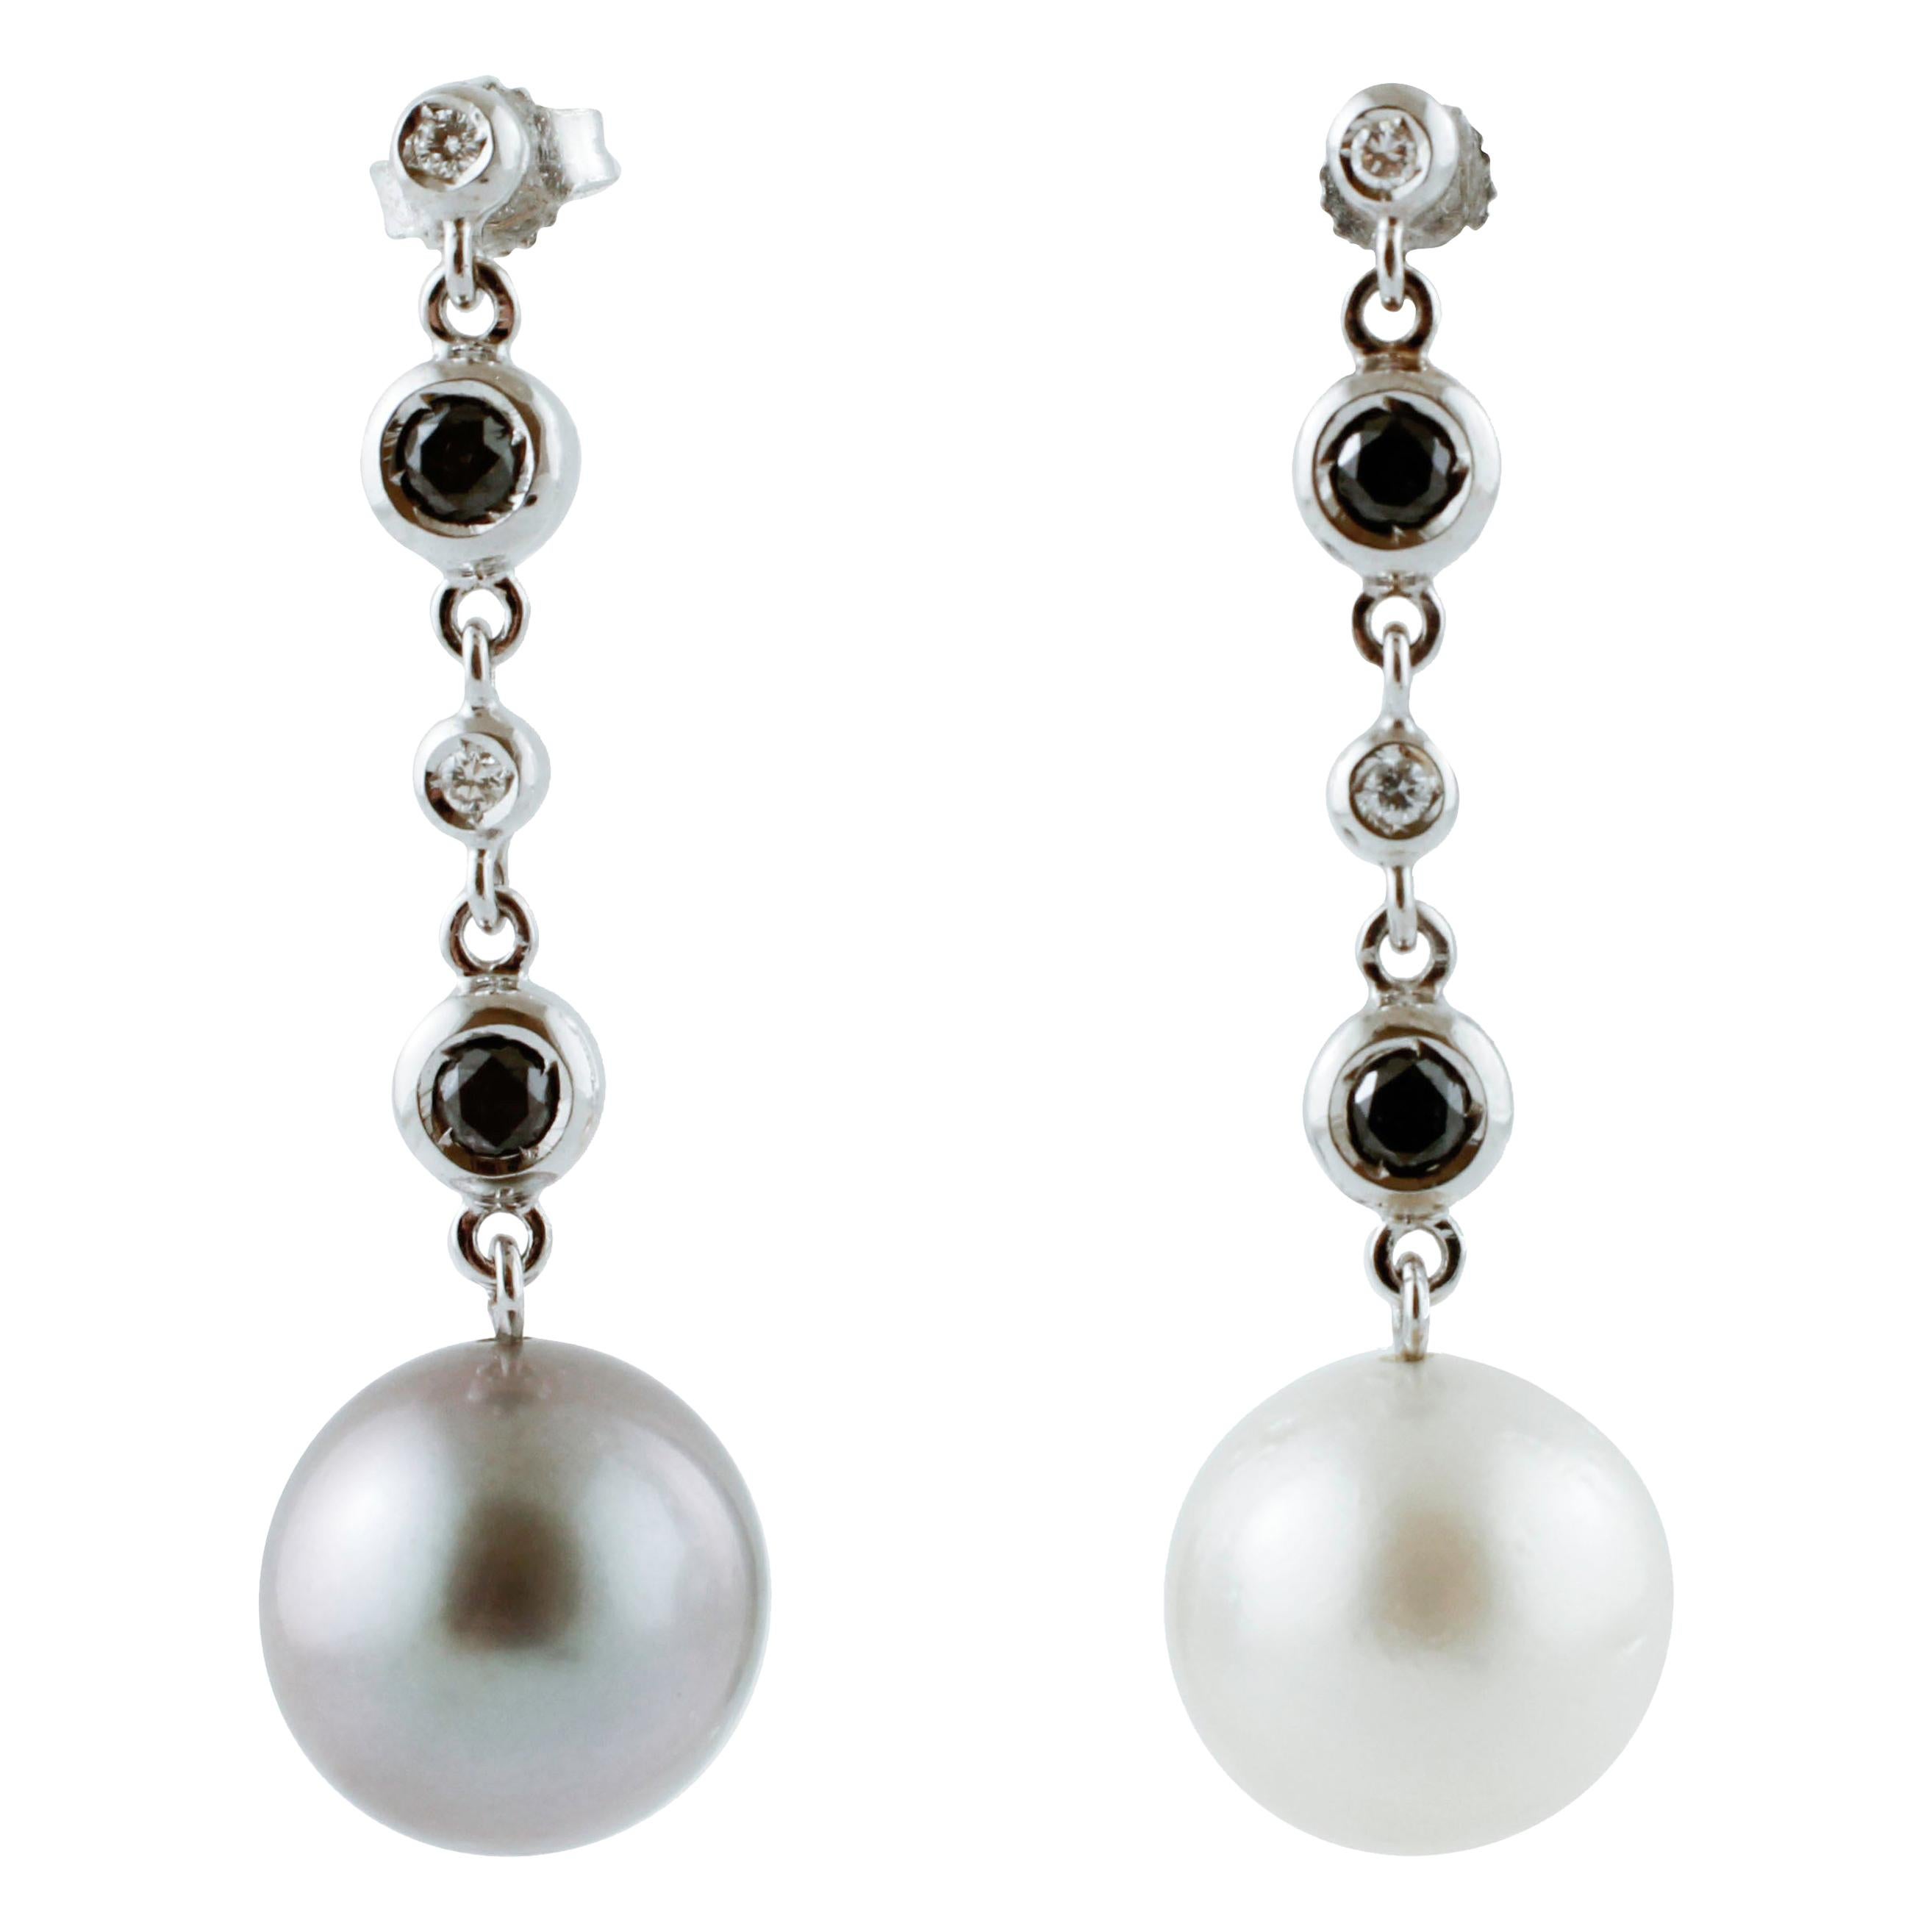 White and Black Diamonds, White and Grey South-Sea Pearls 18 Karat Gold Earrings